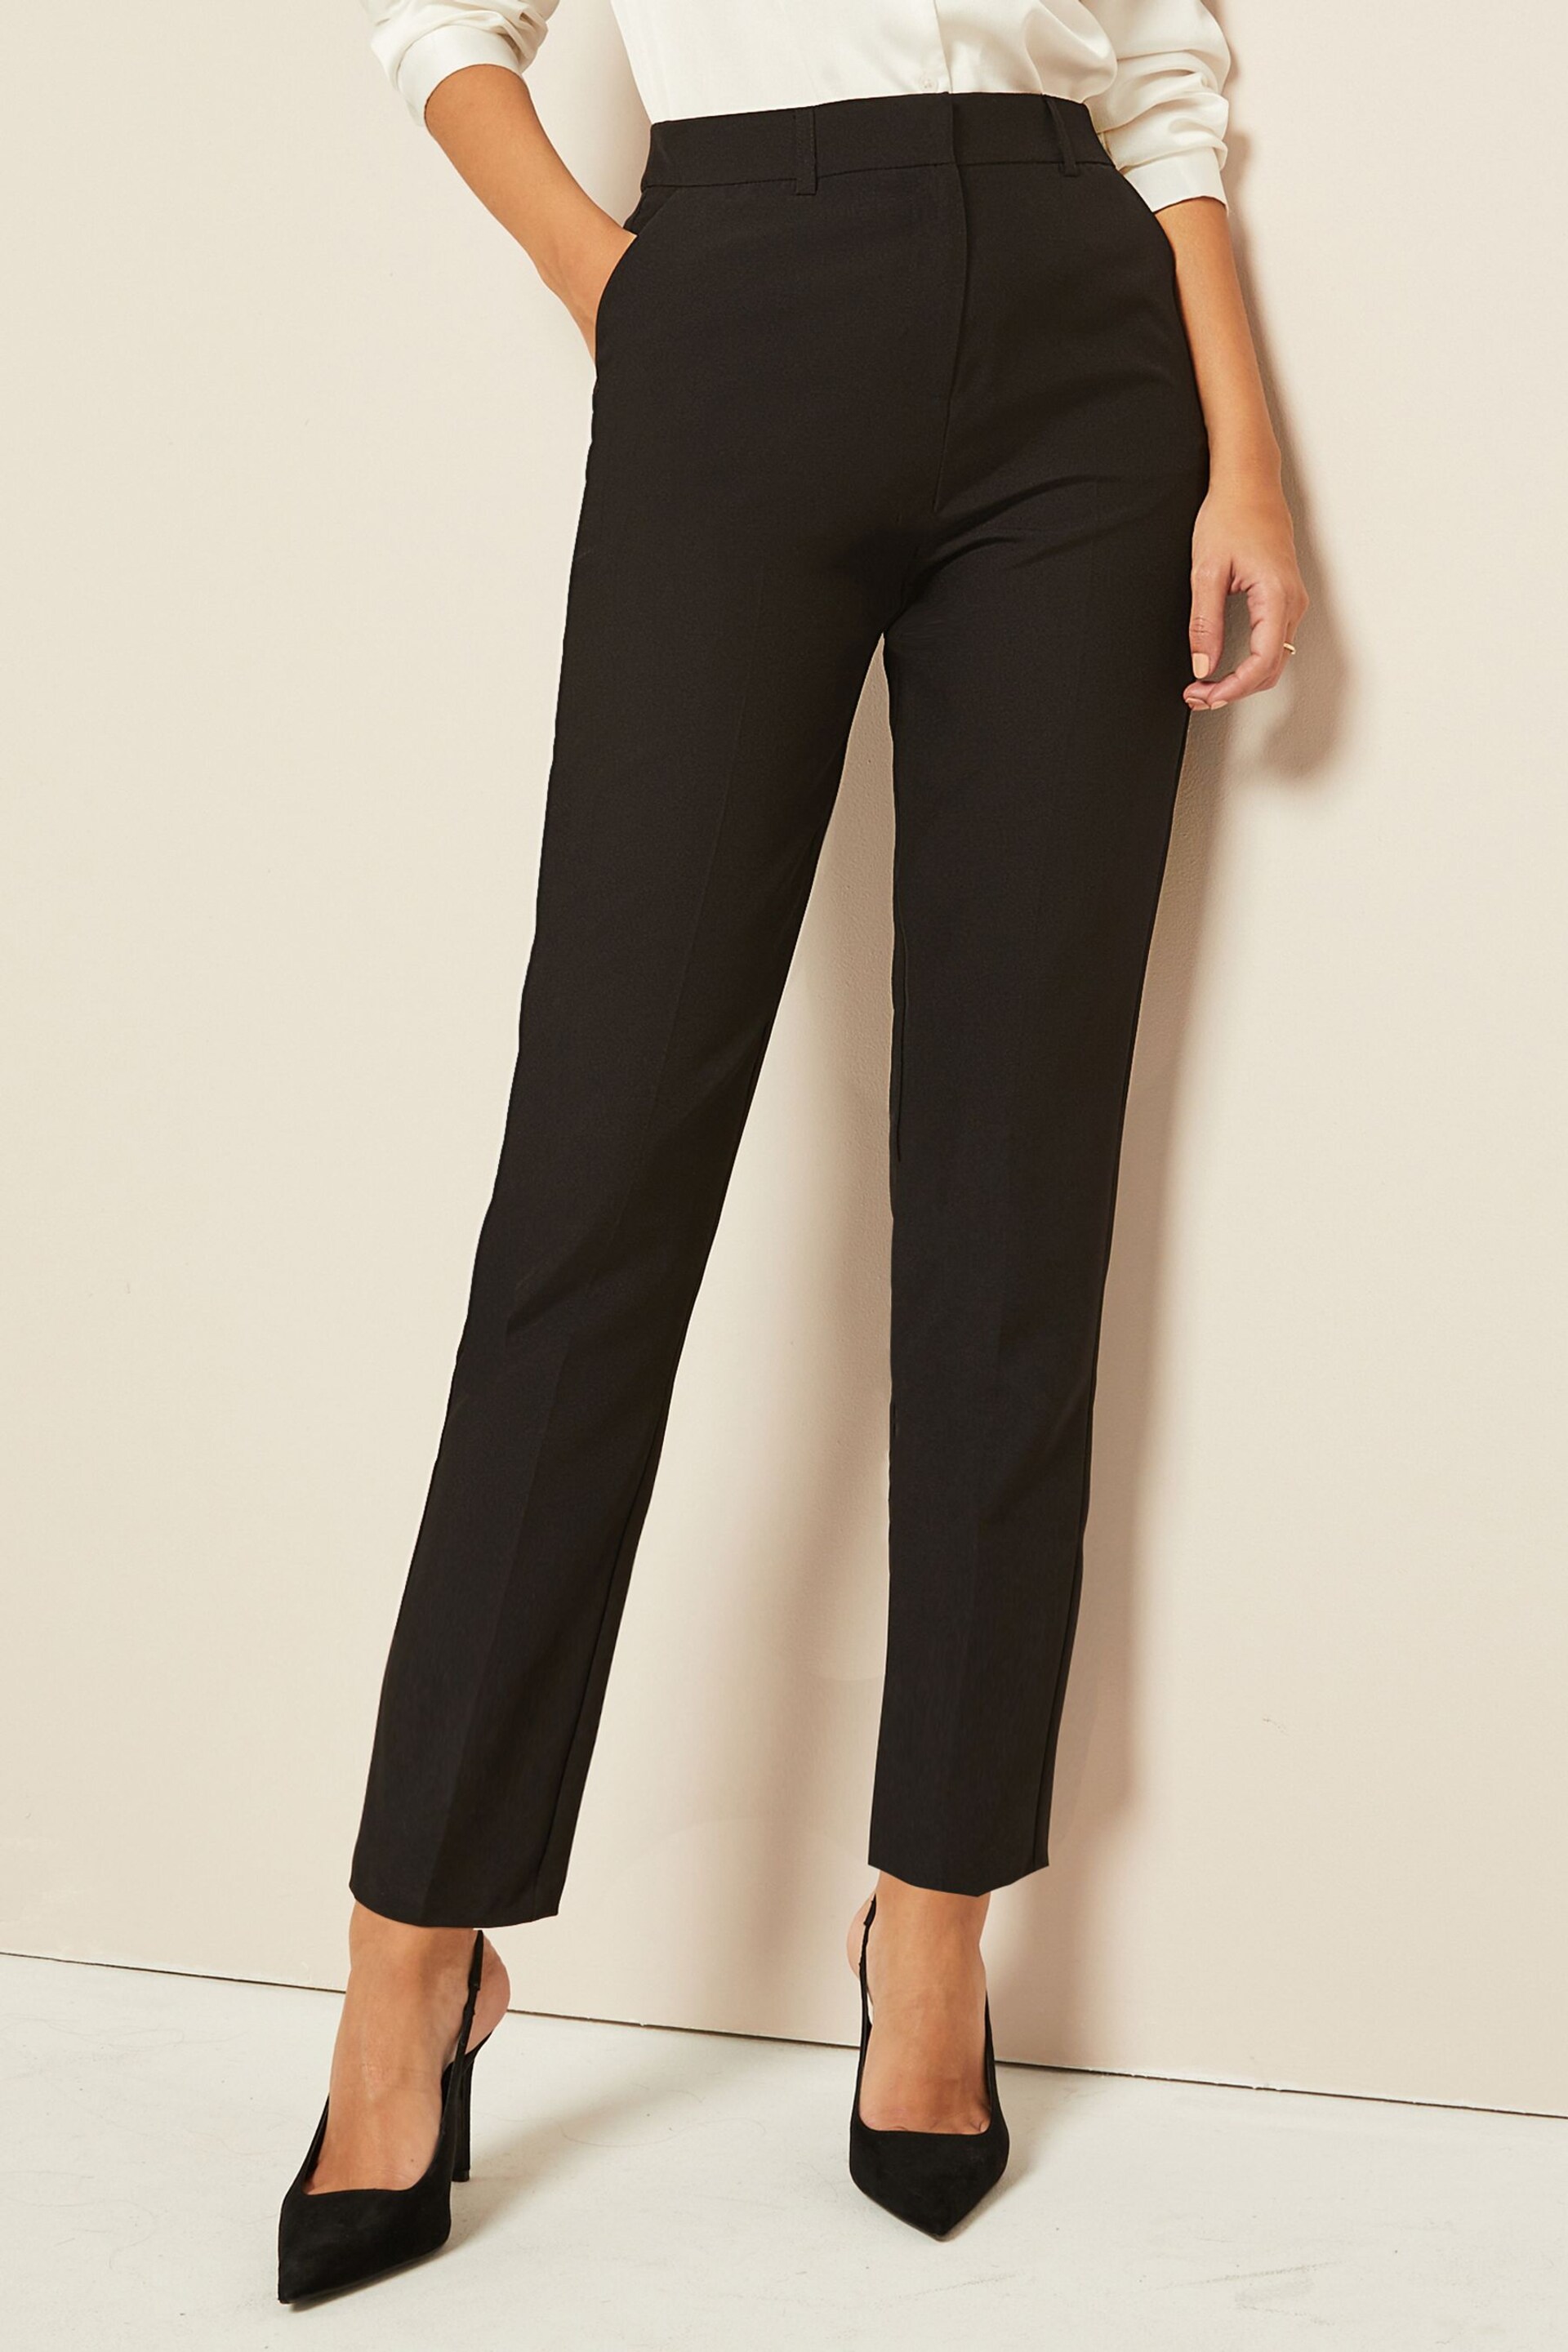 Friends Like These Black Tailored Straight Leg Trousers - Image 1 of 1